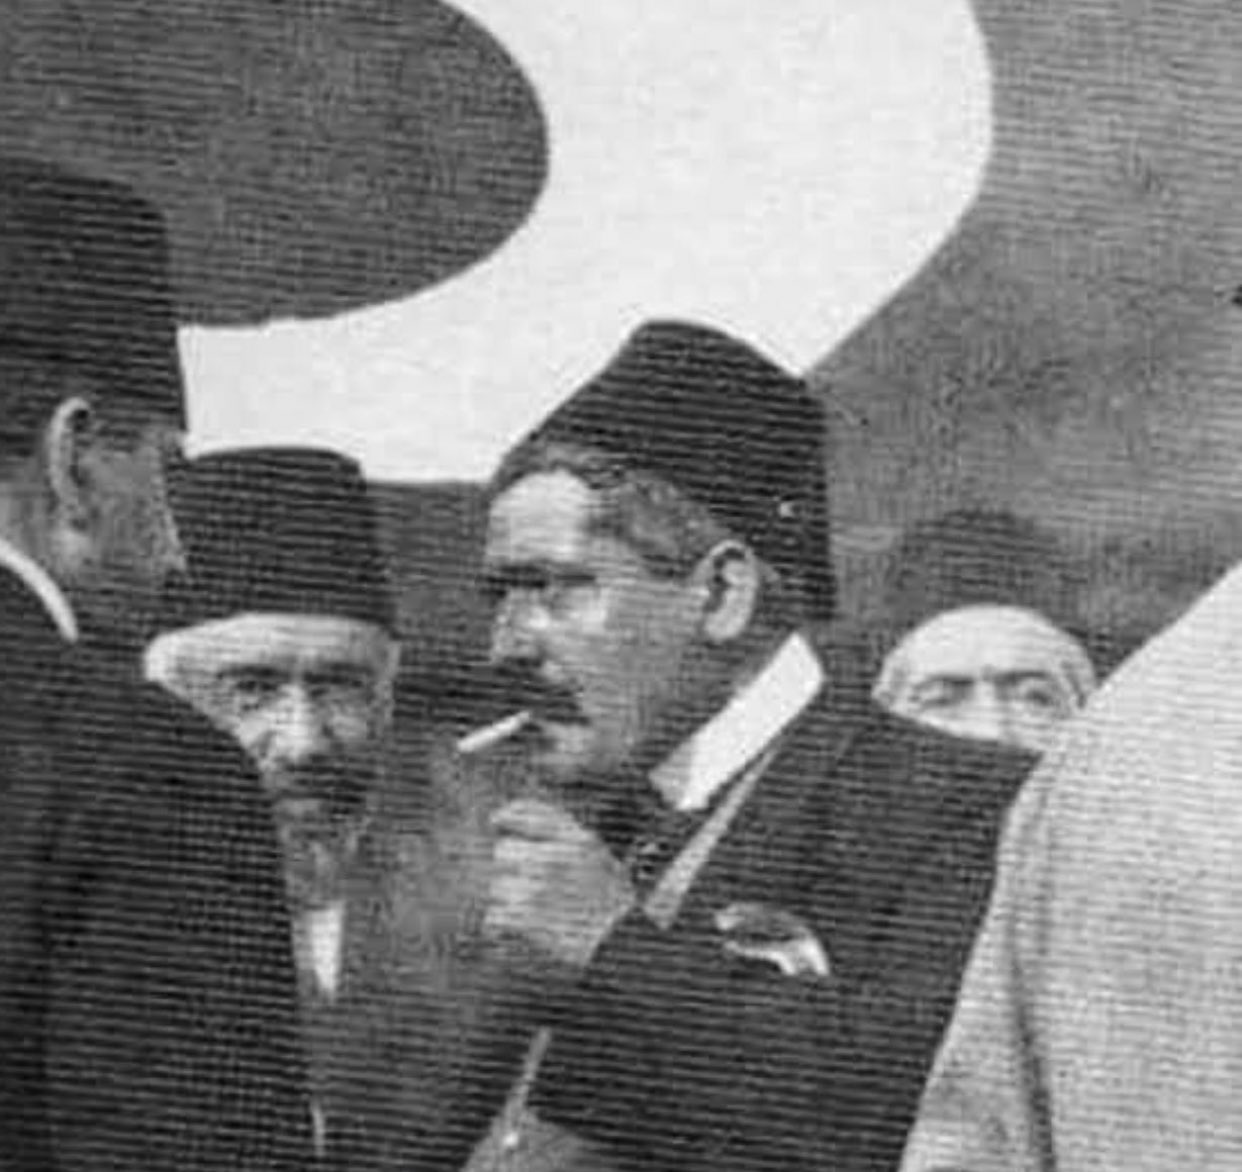 Sevag B on Twitter: "Thread of Turkish politicians, journalists and  academics honouring the memory of Talat Pasha, one of the orchestrators of  the Armenian Genocide. These are worrying instances of Armenophobia and